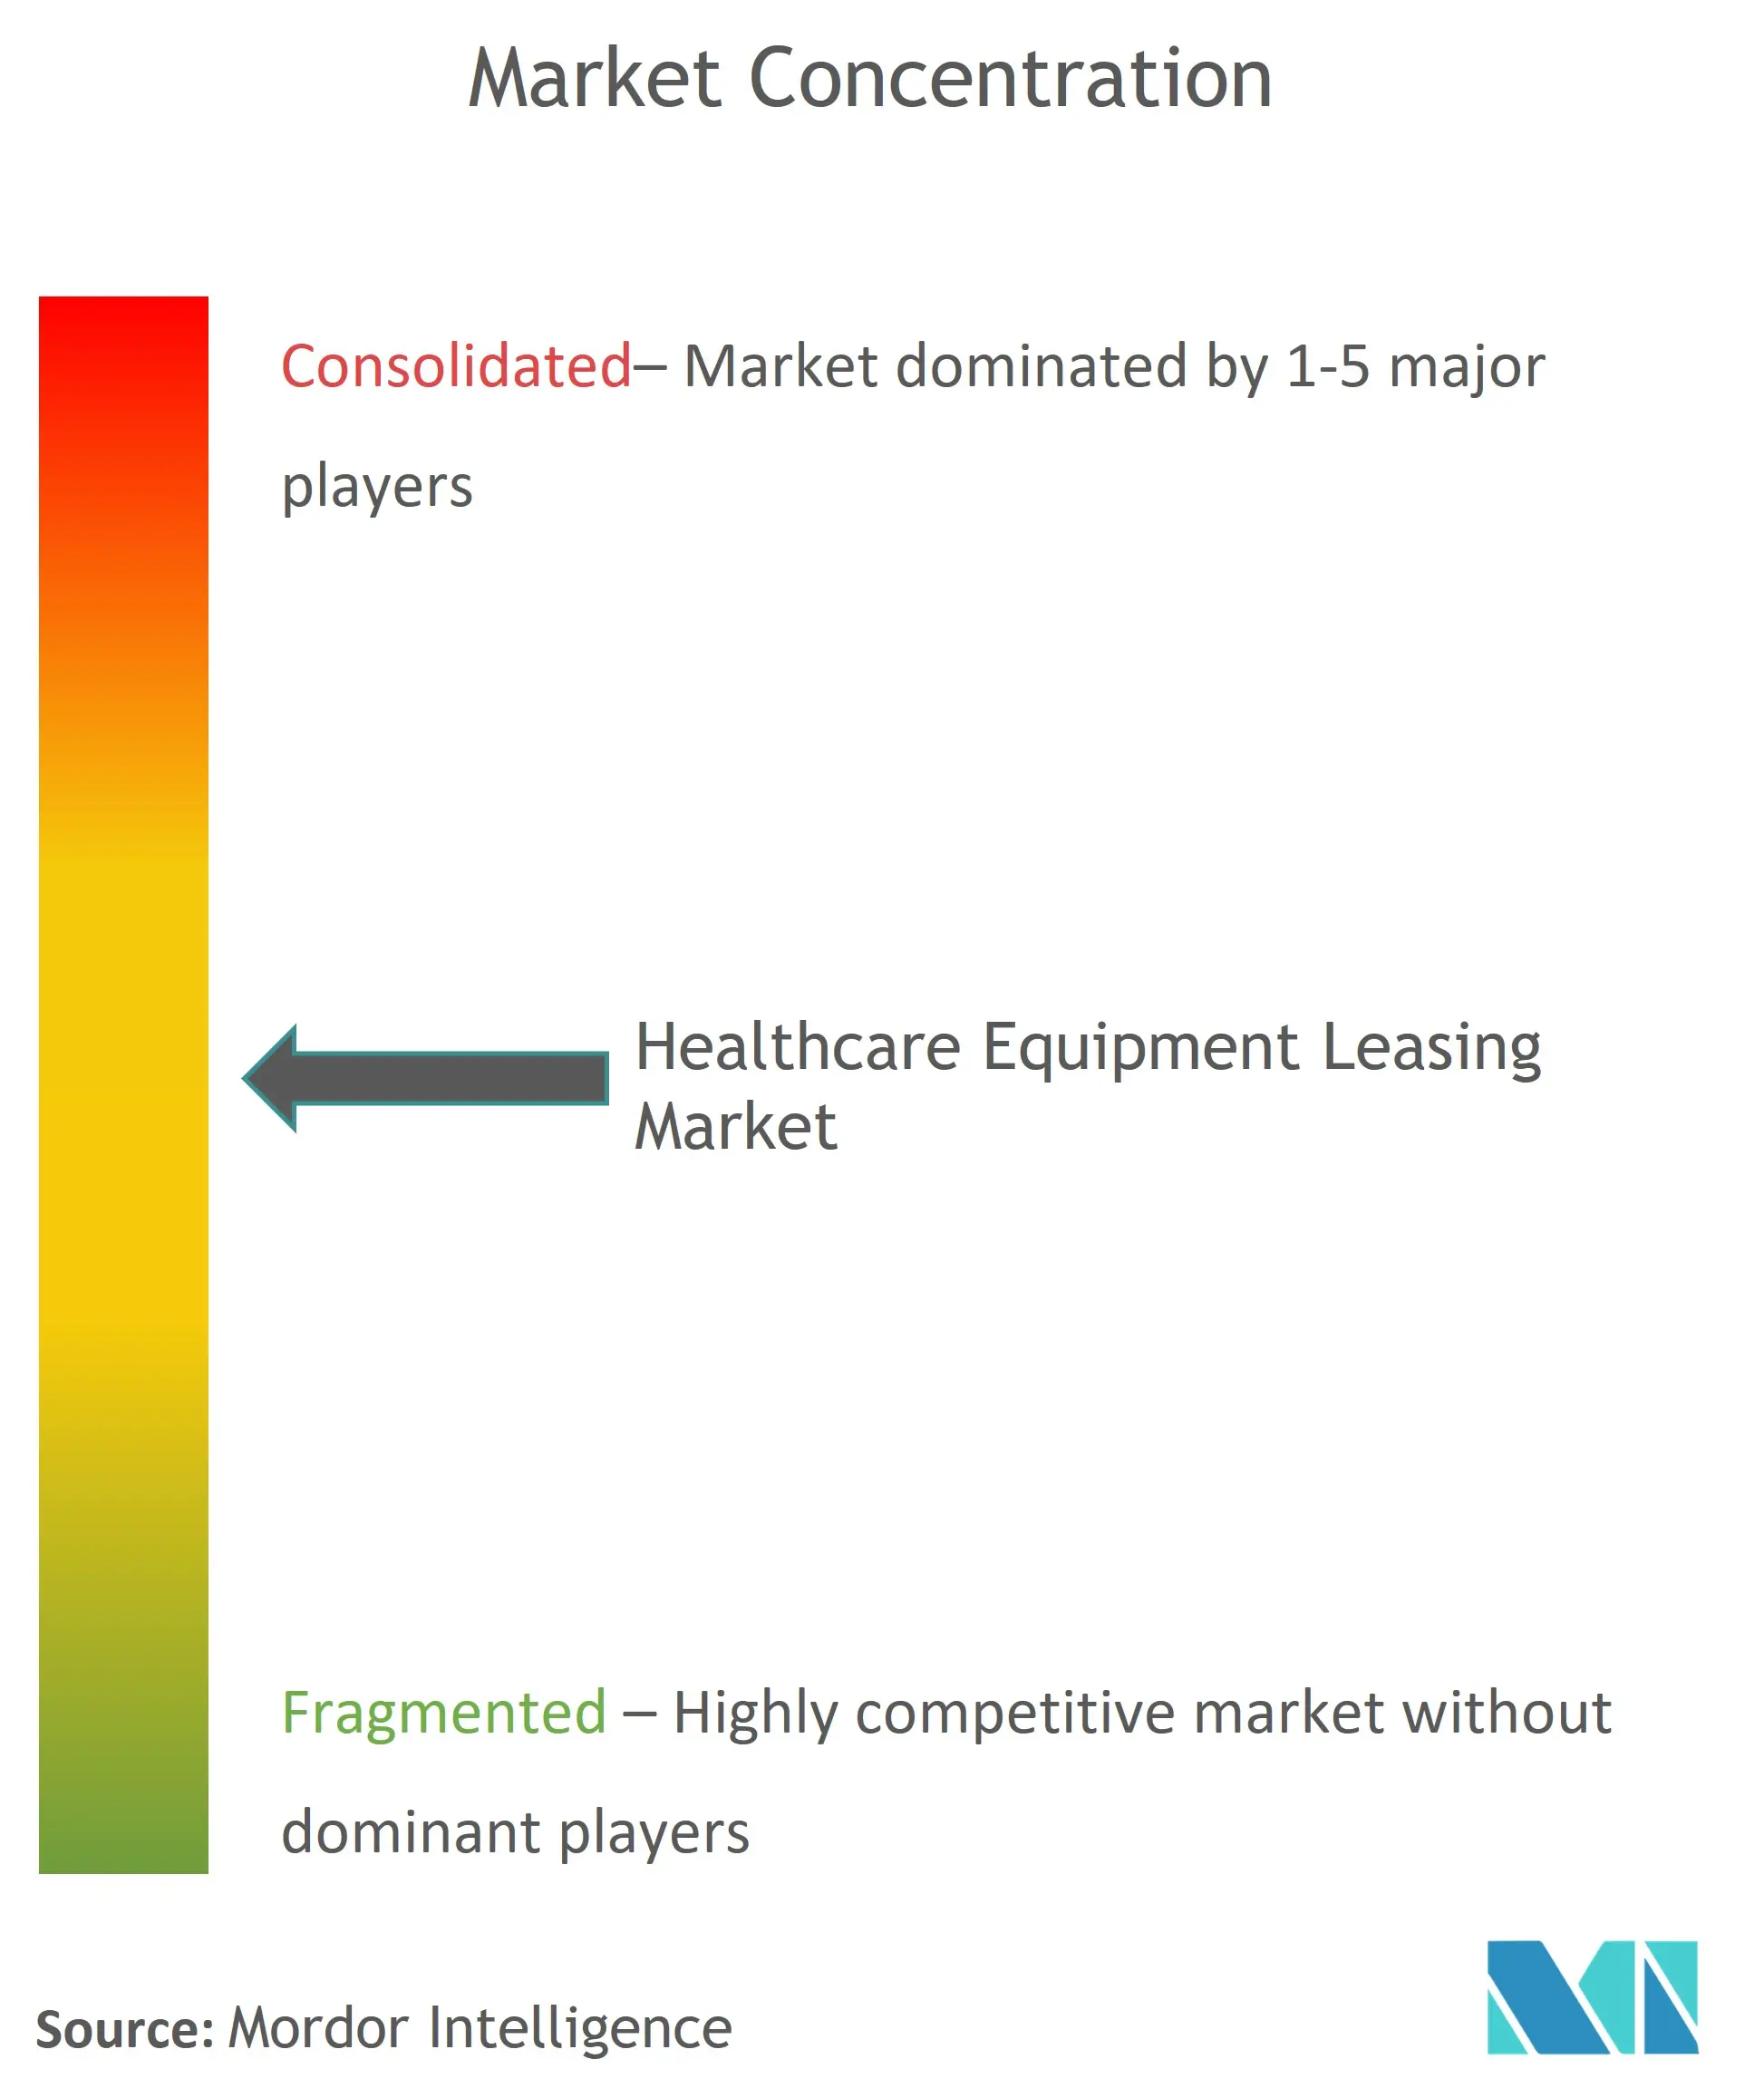 Global Healthcare Equipment Leasing Market Concentration